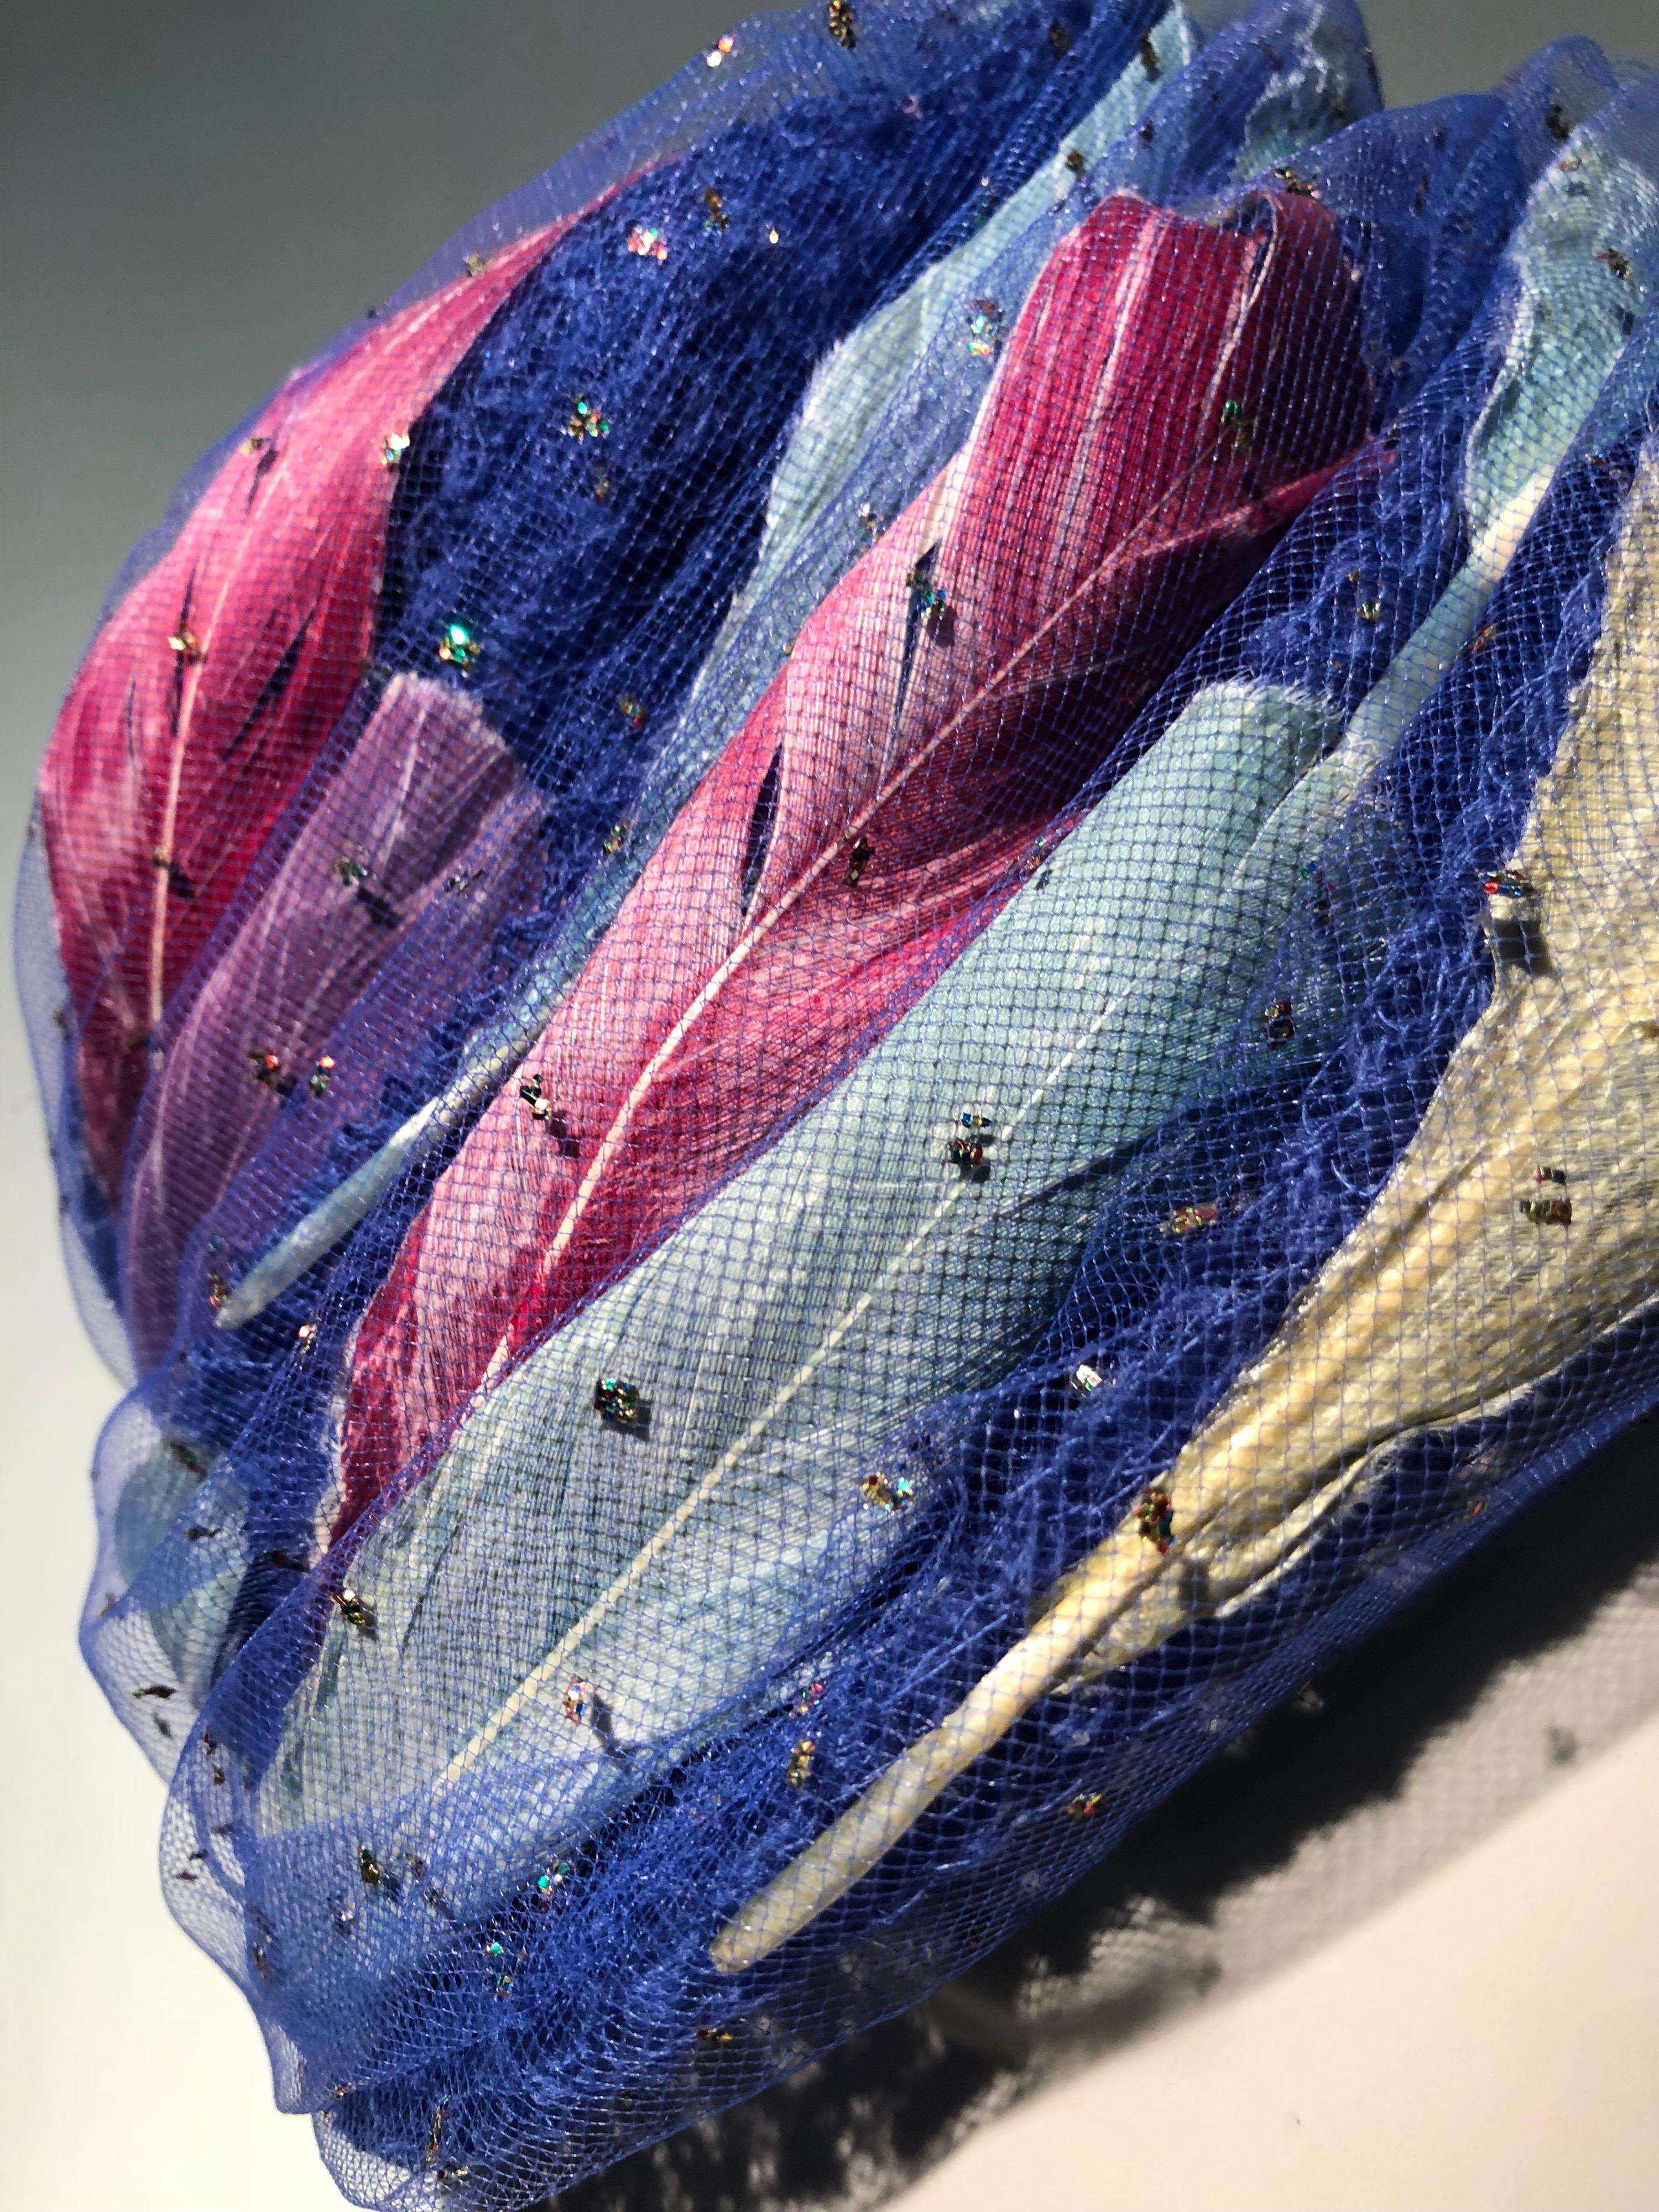 A fabulous 1960s Christian Dior turban-styled hat in cobalt blue felt and pink, white and blue feathers enclosed in glitter studded tulle! This is one of Dior's signature looks!! Originally sold at Lord and Taylor.